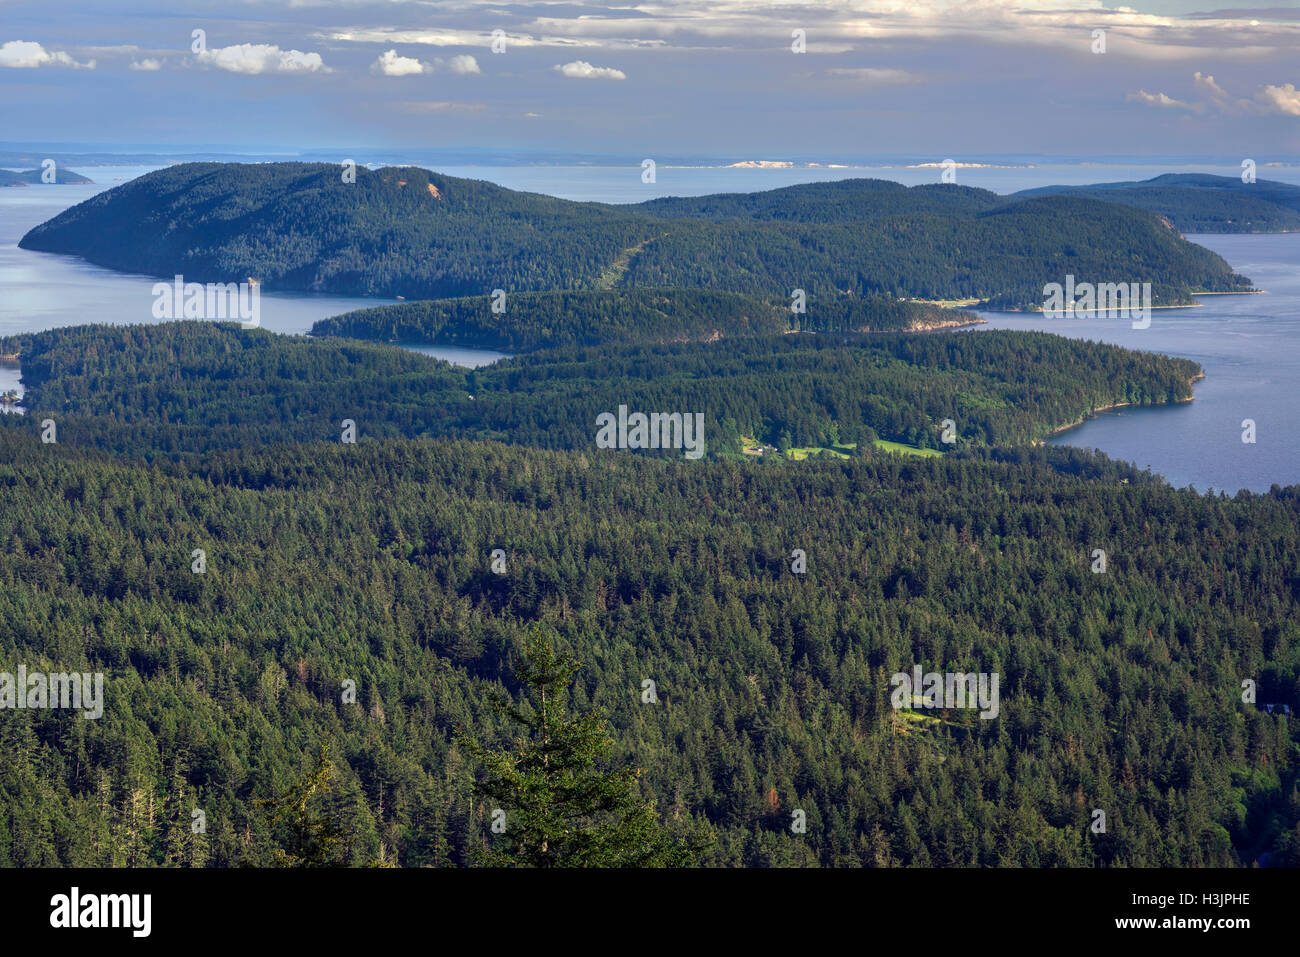 USA, Washington, San Juan Islands, View south from Moran State Park on Orcas Island reveals densely forested islands. Stock Photo